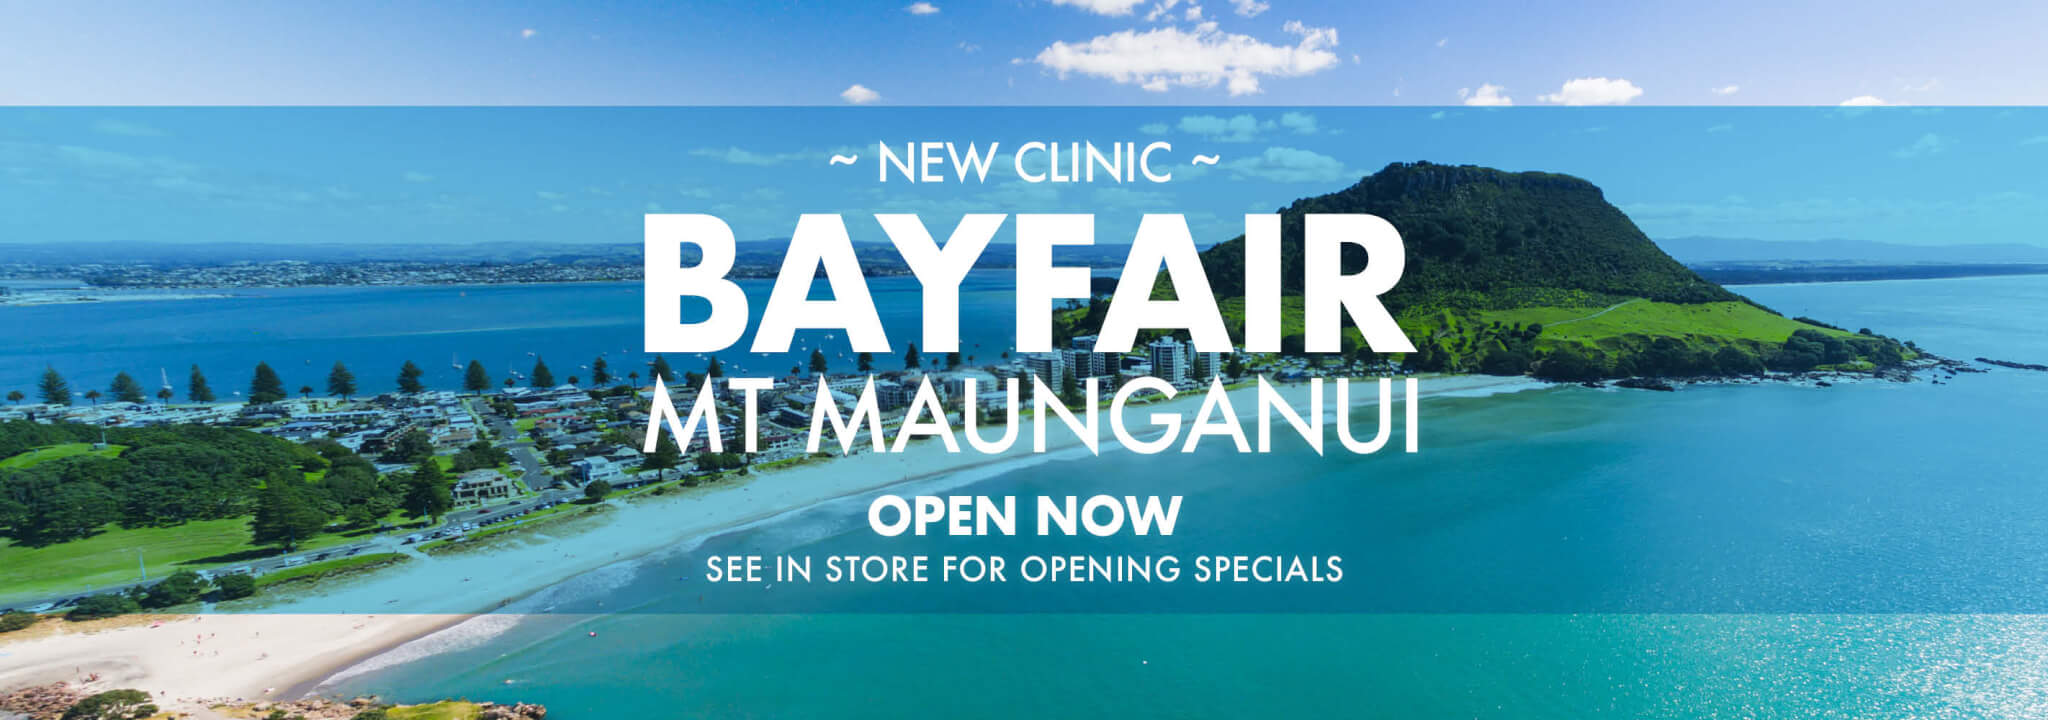 TCC 003502 The Cosmetic Clinic Bayfair Launch Website Banner 2048x720px V02 